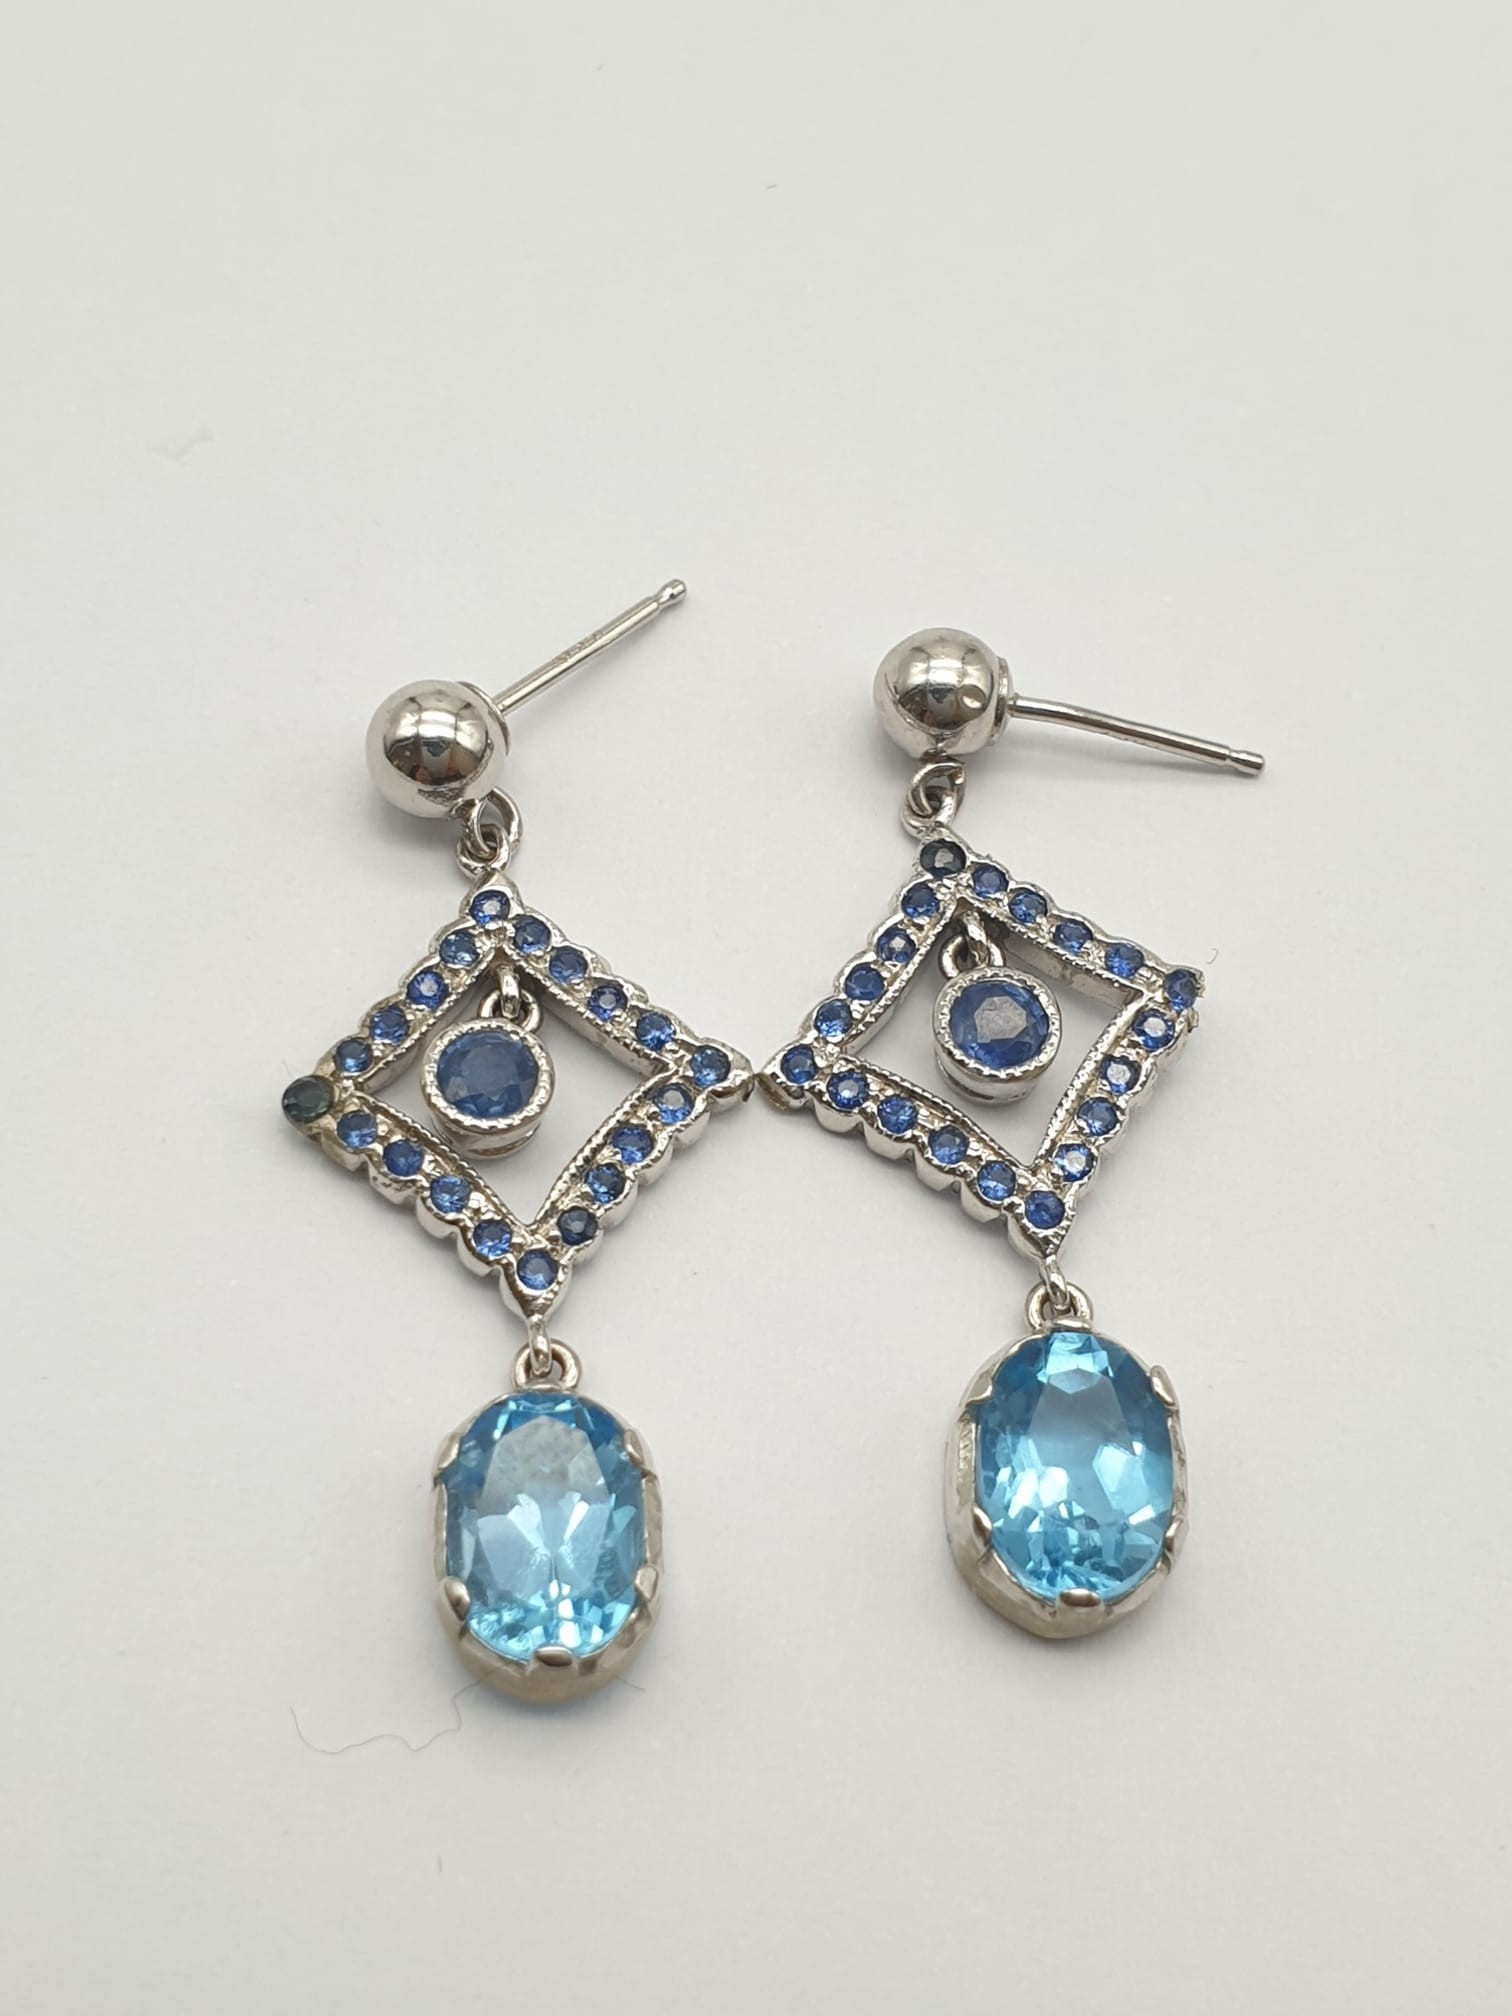 Set of 14K White Gold Sapphire Drop Earrings and Necklace. Multiple Sapphires on each piece. 46cm - Image 4 of 5